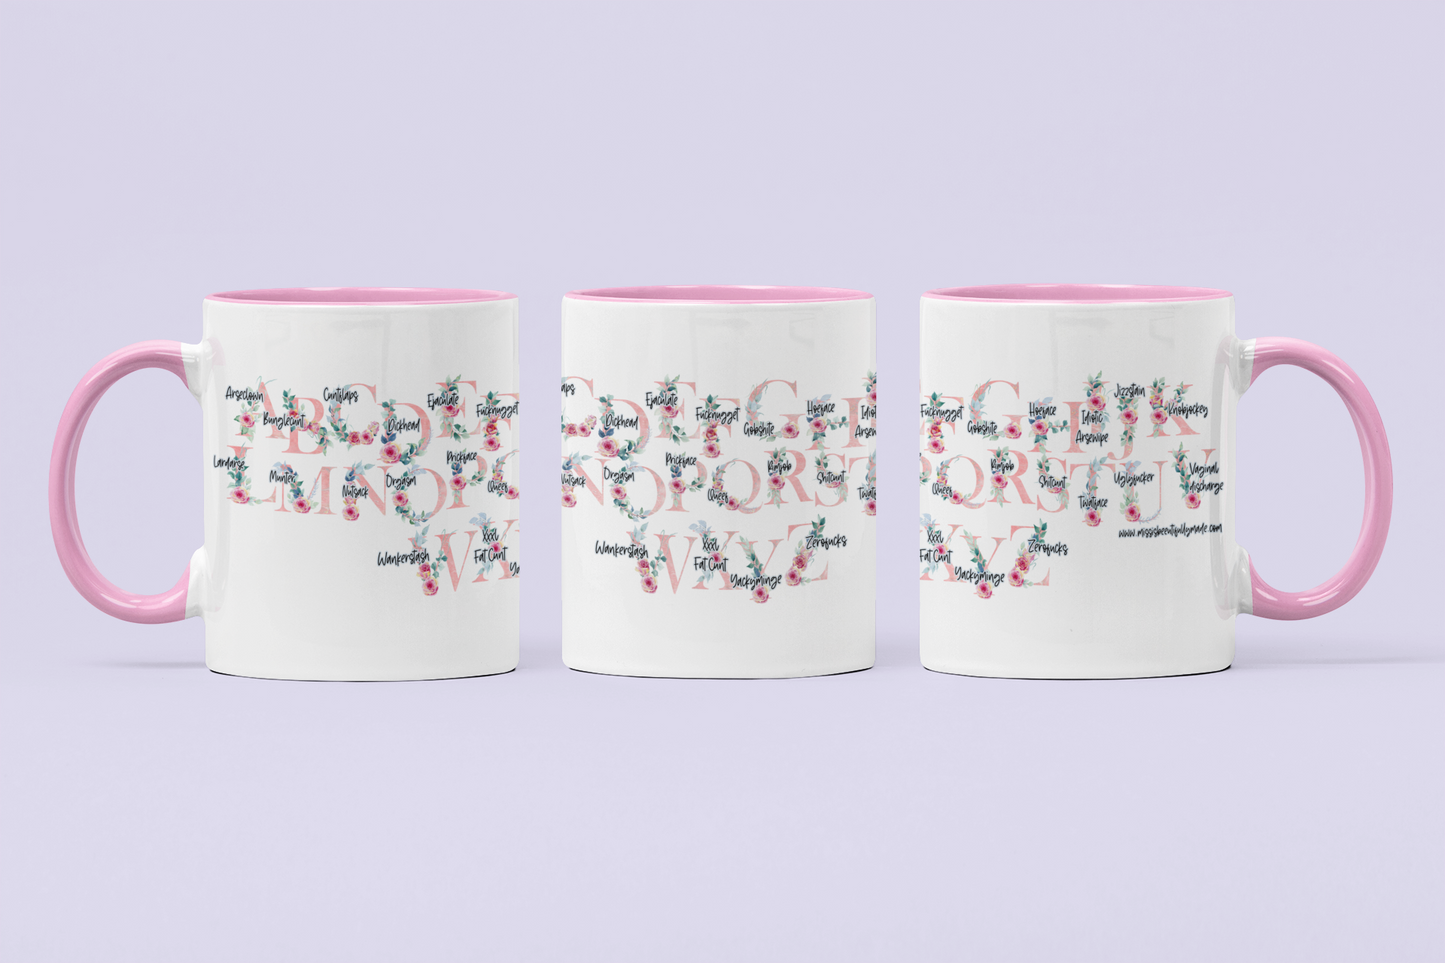 A white ceramic mug featuring a pink floral alphabet design around the whole of the mug. Each letter has a funny profanity word associated to it i.e, a for arseclown, b for bunglecunt.